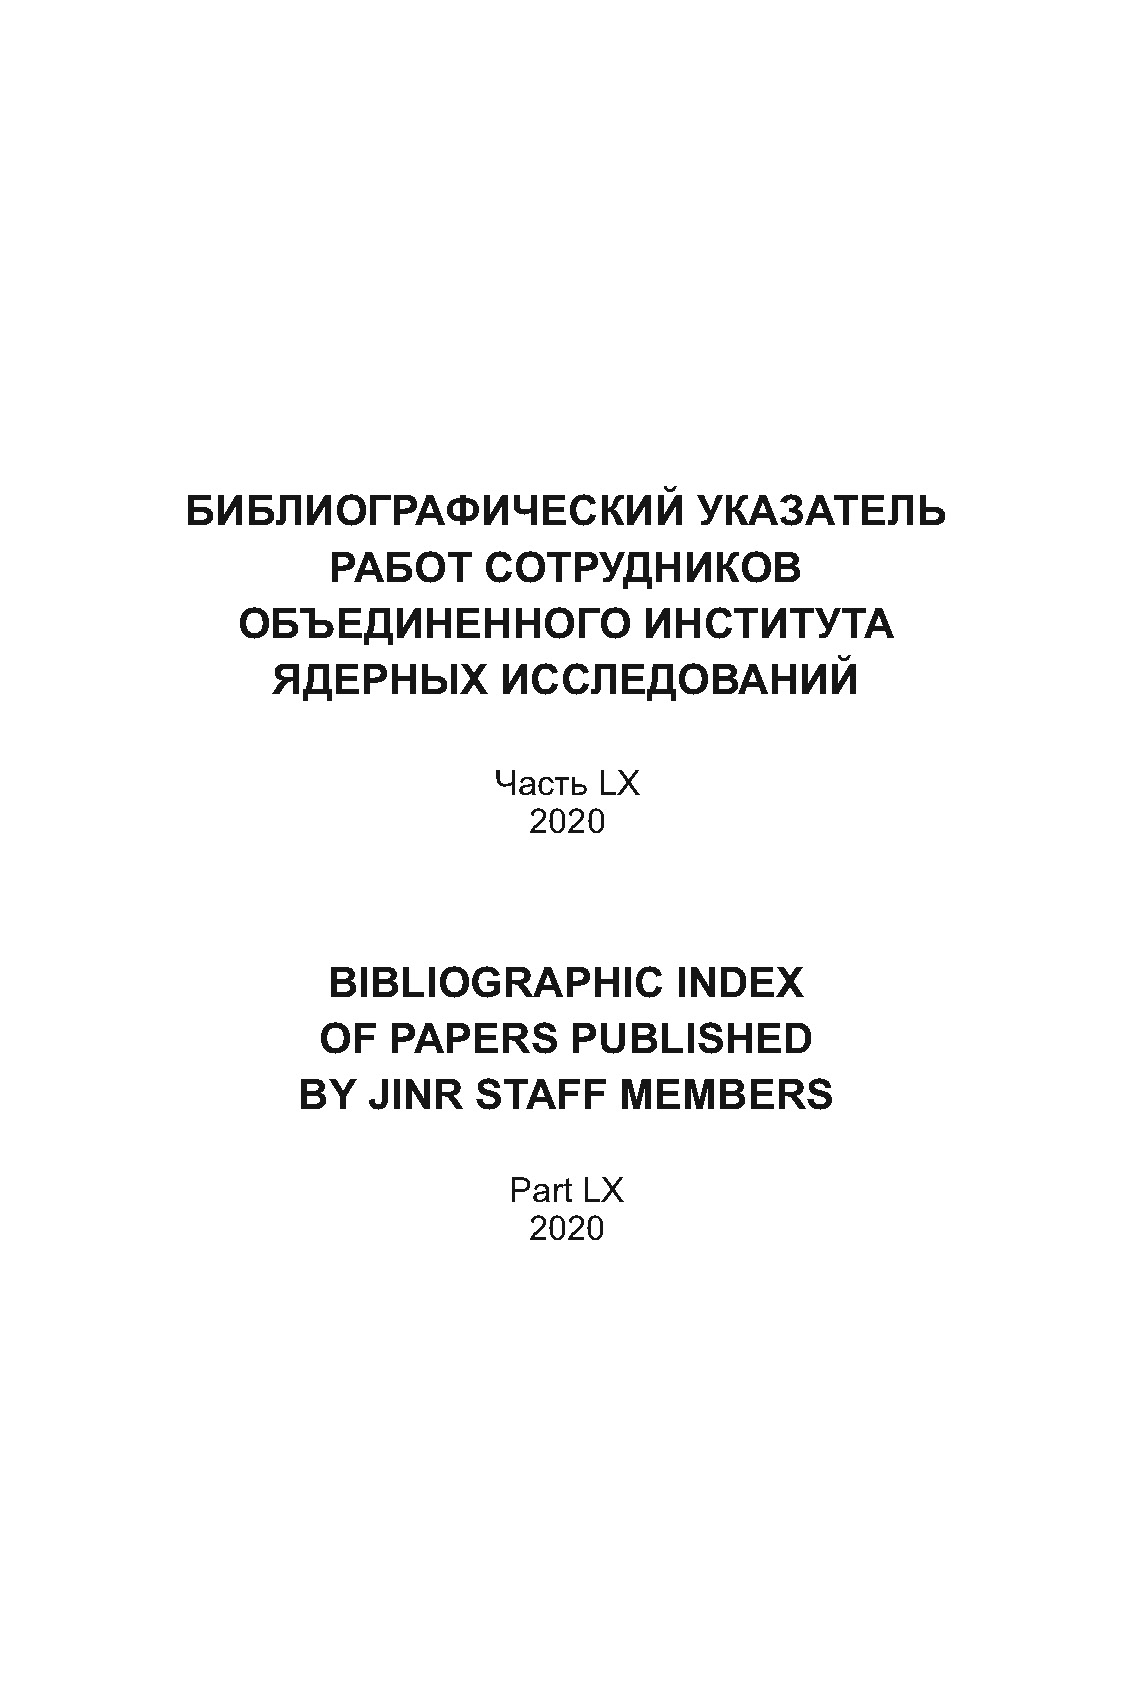 BIBLIOGRAPHIC INDEXOF PAPERS PUBLISHED BY JINR STAFF MEMBERS: Part LX 2020